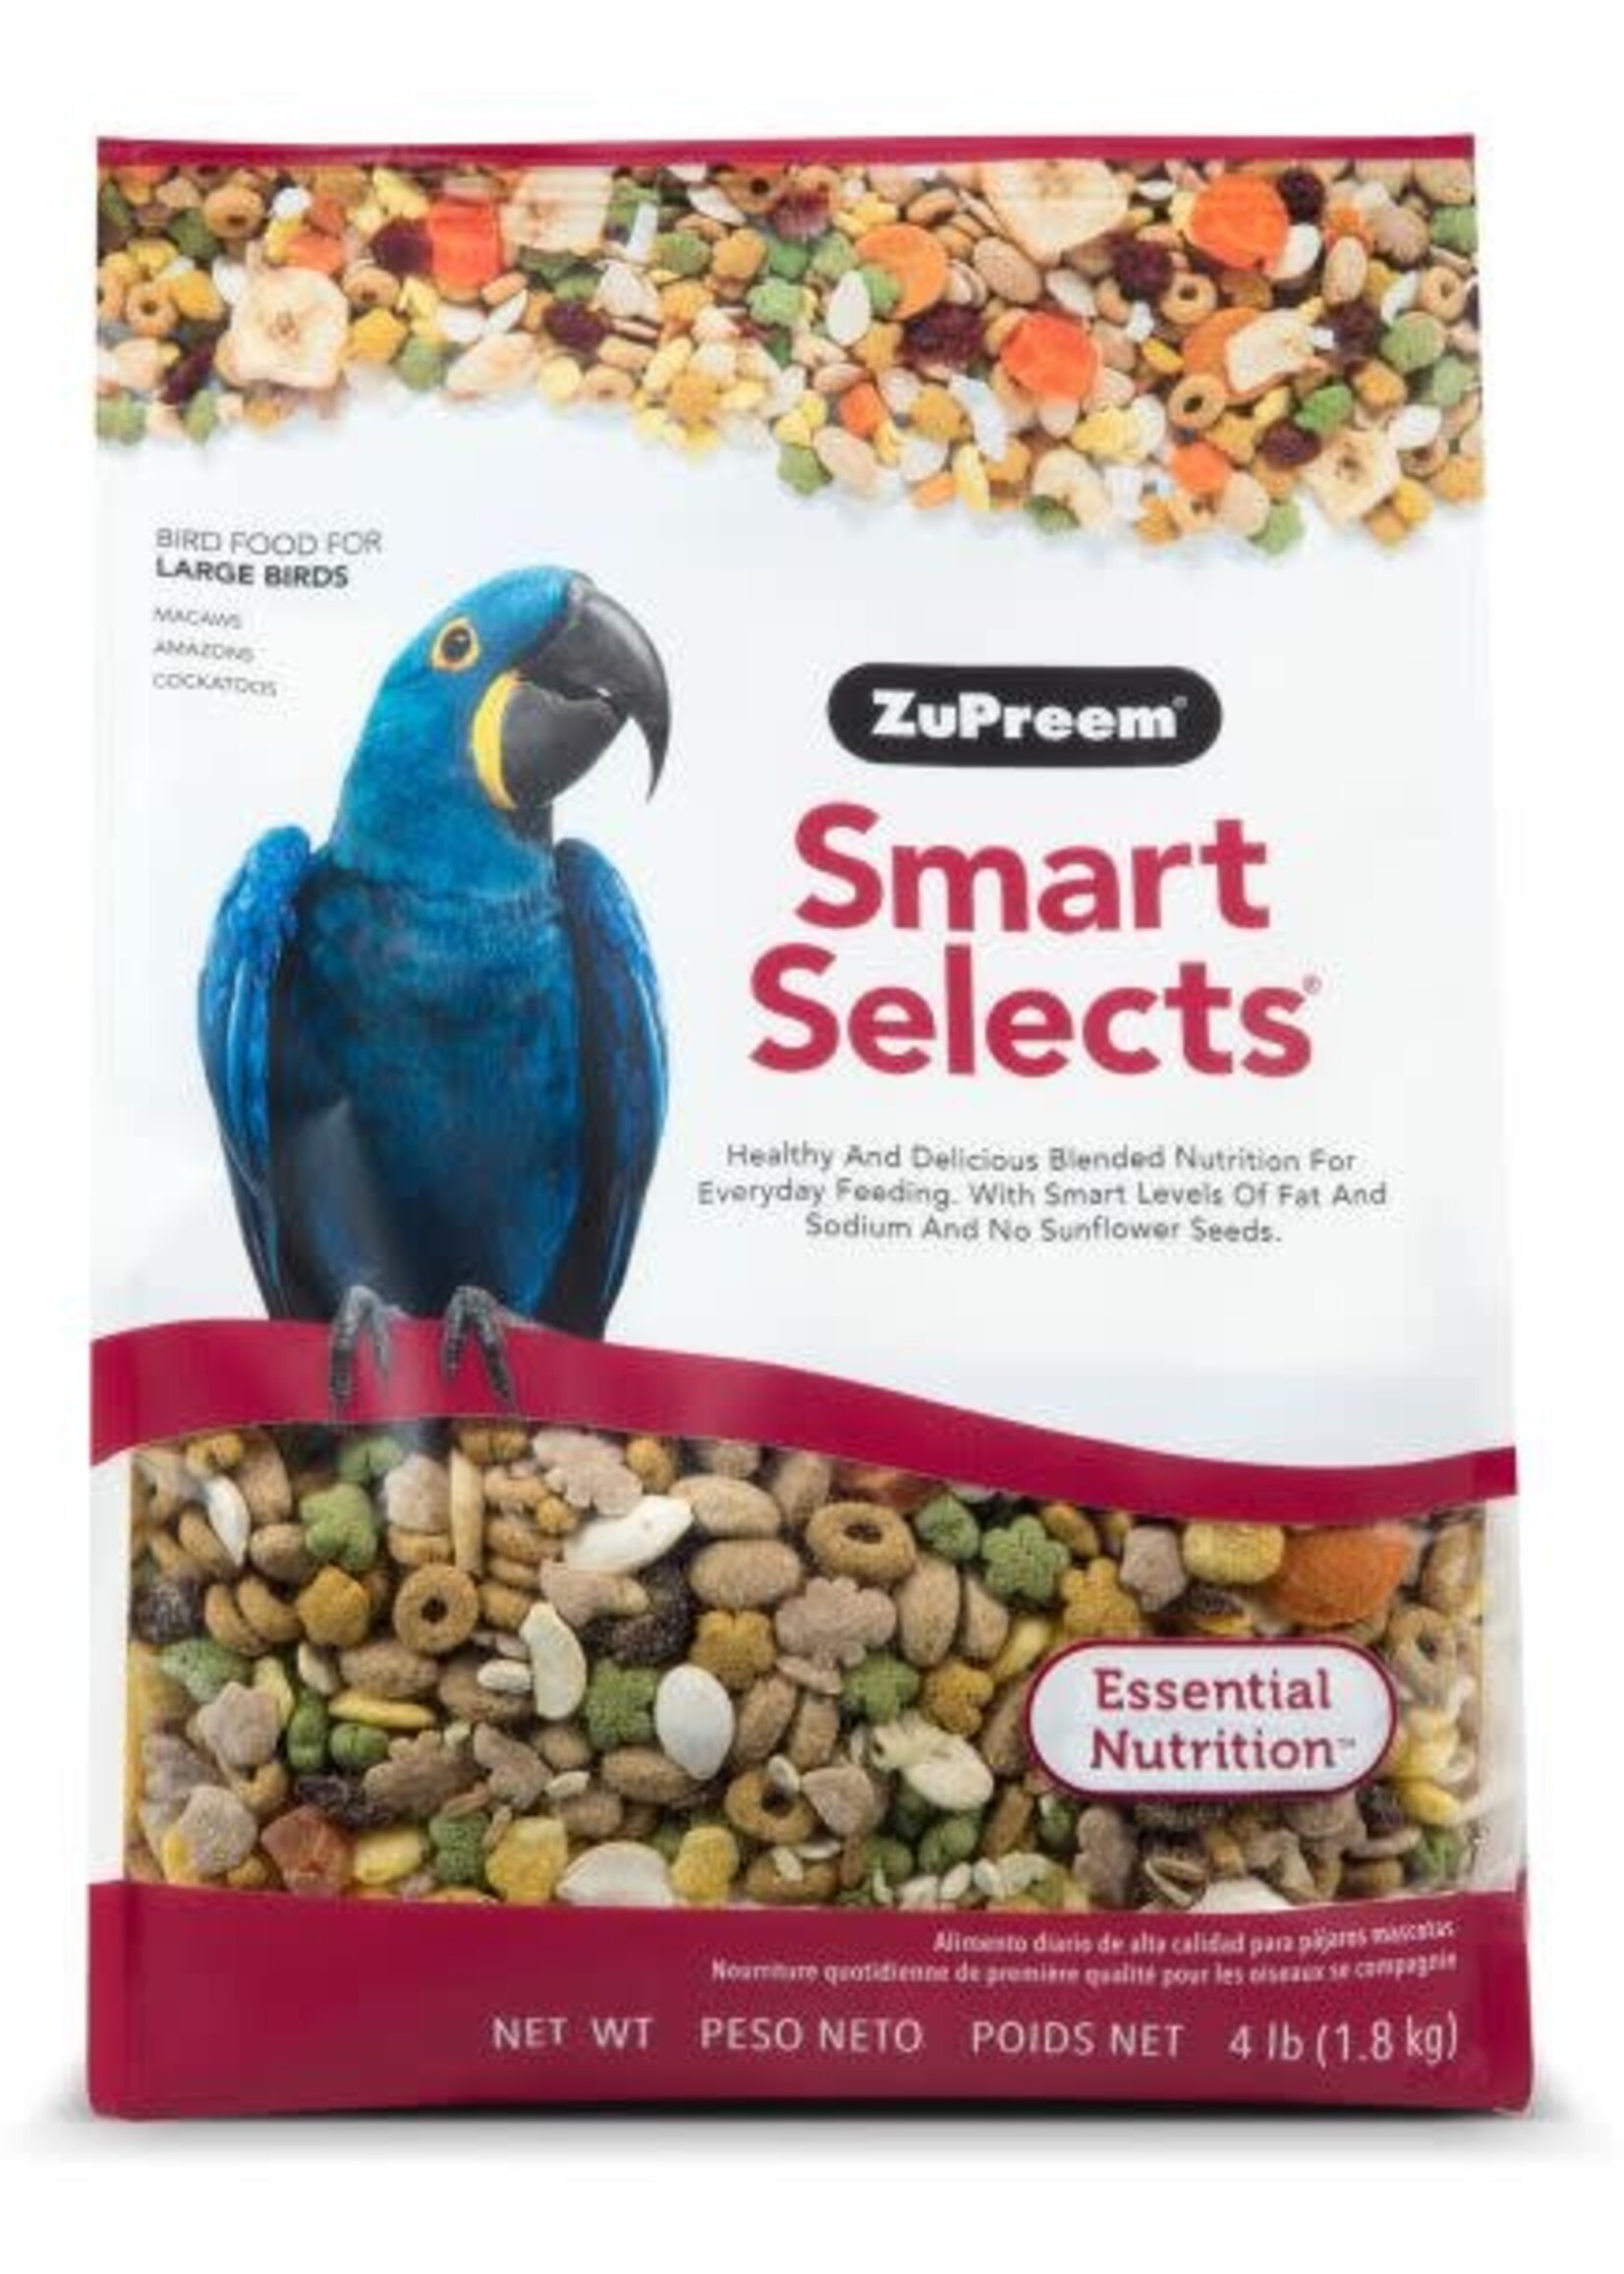 Zupreem ZuPreem "Smart Selects" Food For Macaws, Parrots, Cockatoos & Other Large Birds 4lbs 34040